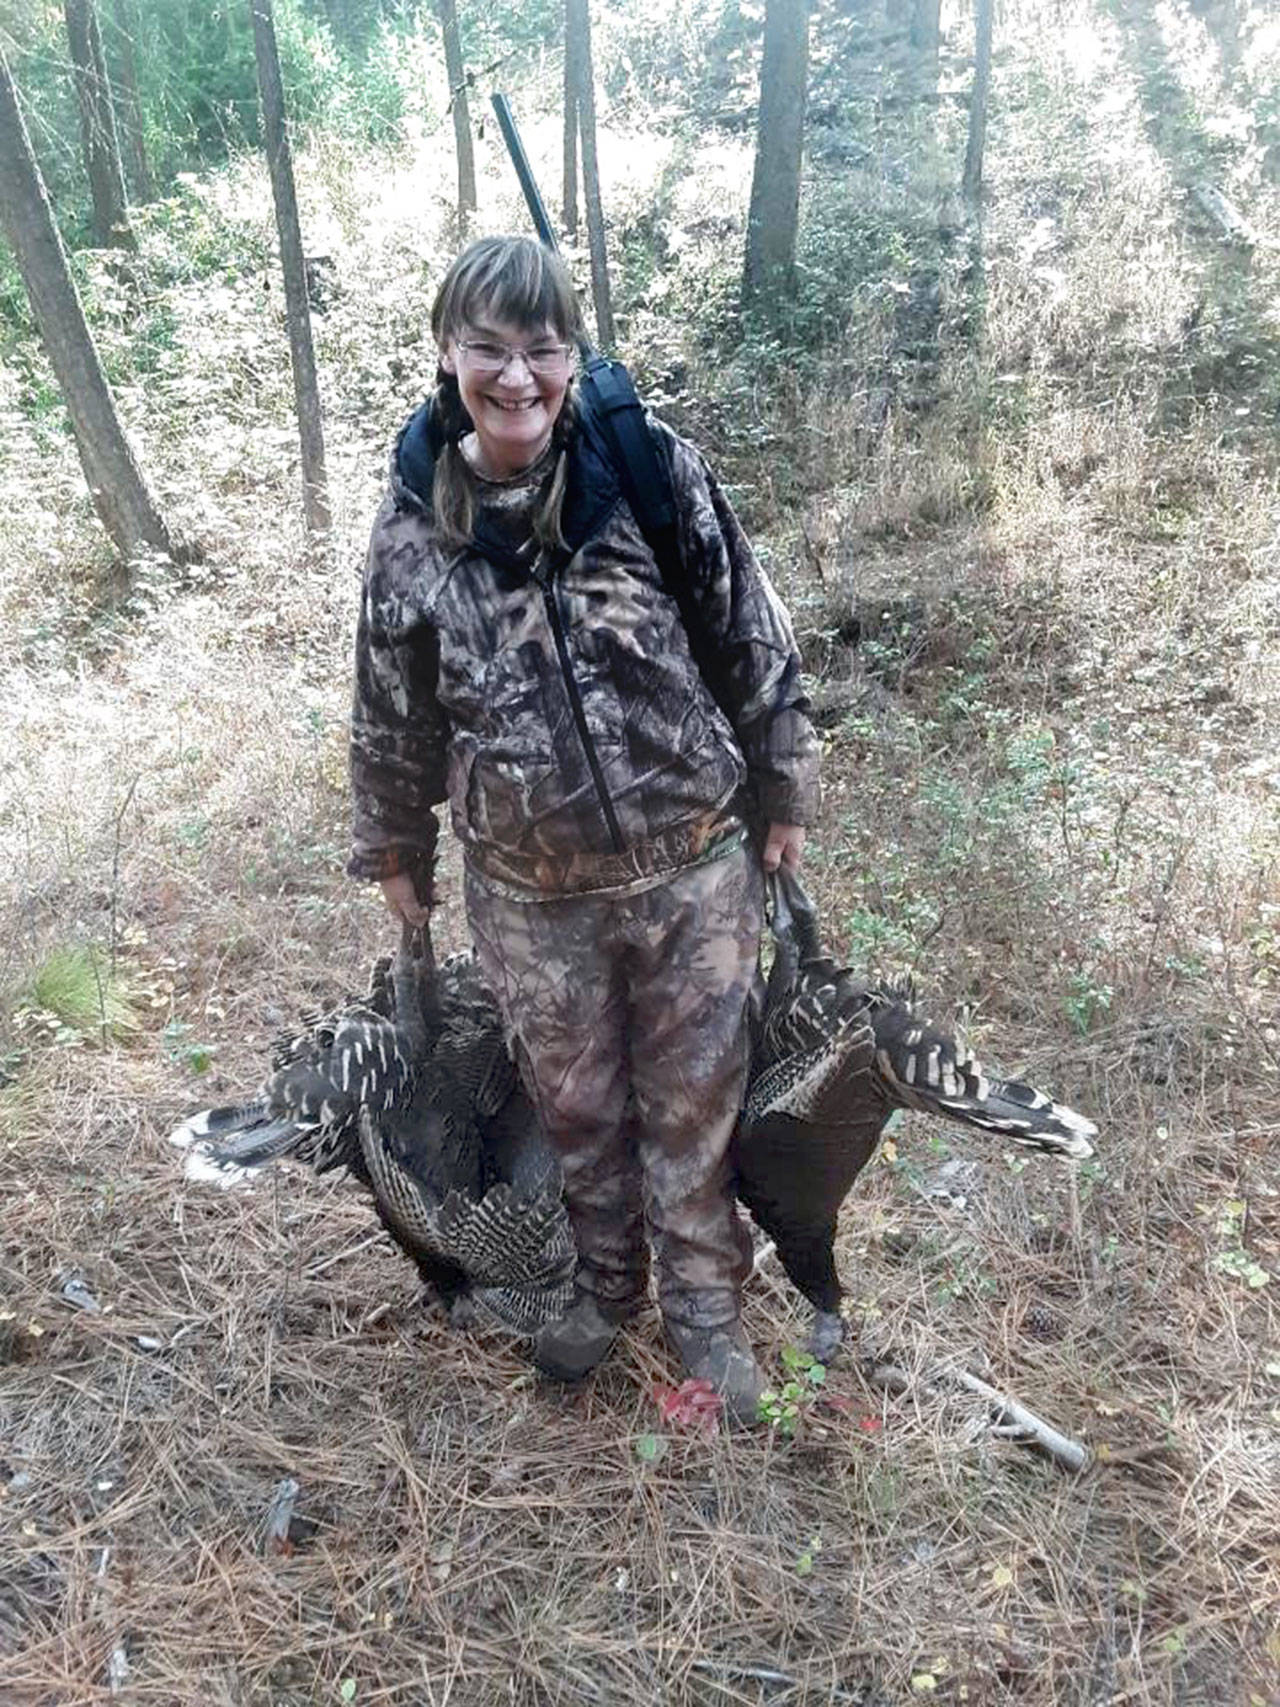 Cookie Singhose-Allison of Port Angeles bagged three turkeys during a recent hunting trip in the northeastern part of the state. Singhose-Allison said her family is all set for Thanksgiving after the successful trip. (Submitted photo)